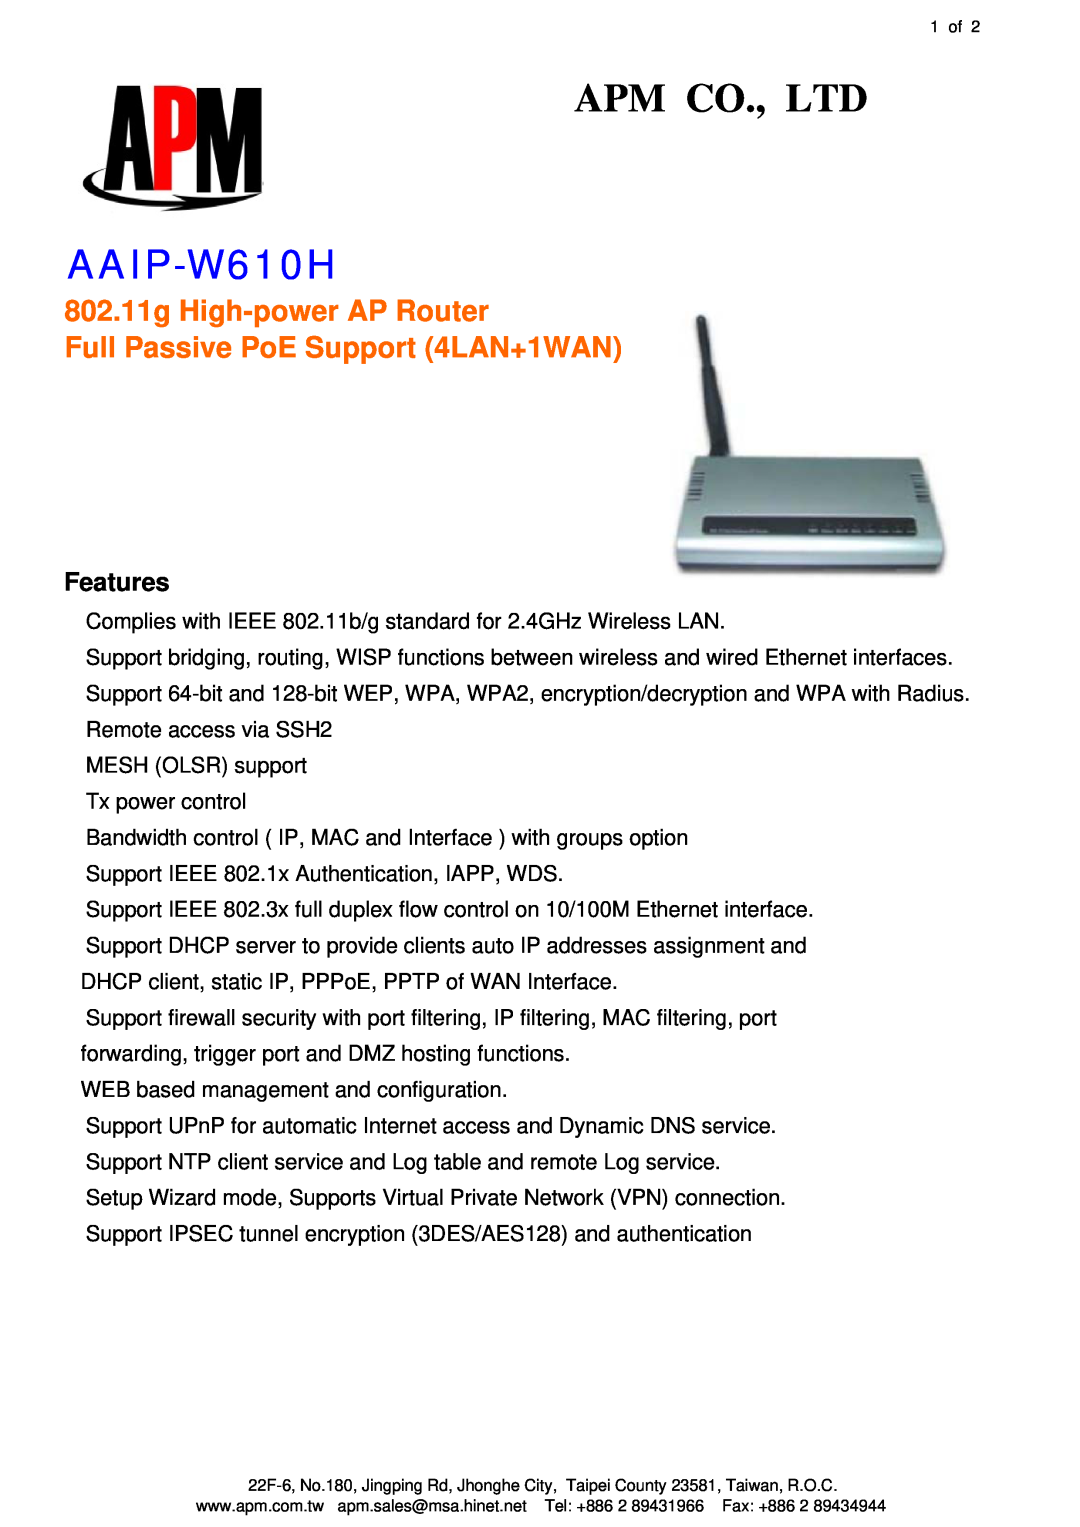 APM AAIP-W610H manual Features, 802.11g High-power AP Router Full Passive PoE Support 4LAN+1WAN 